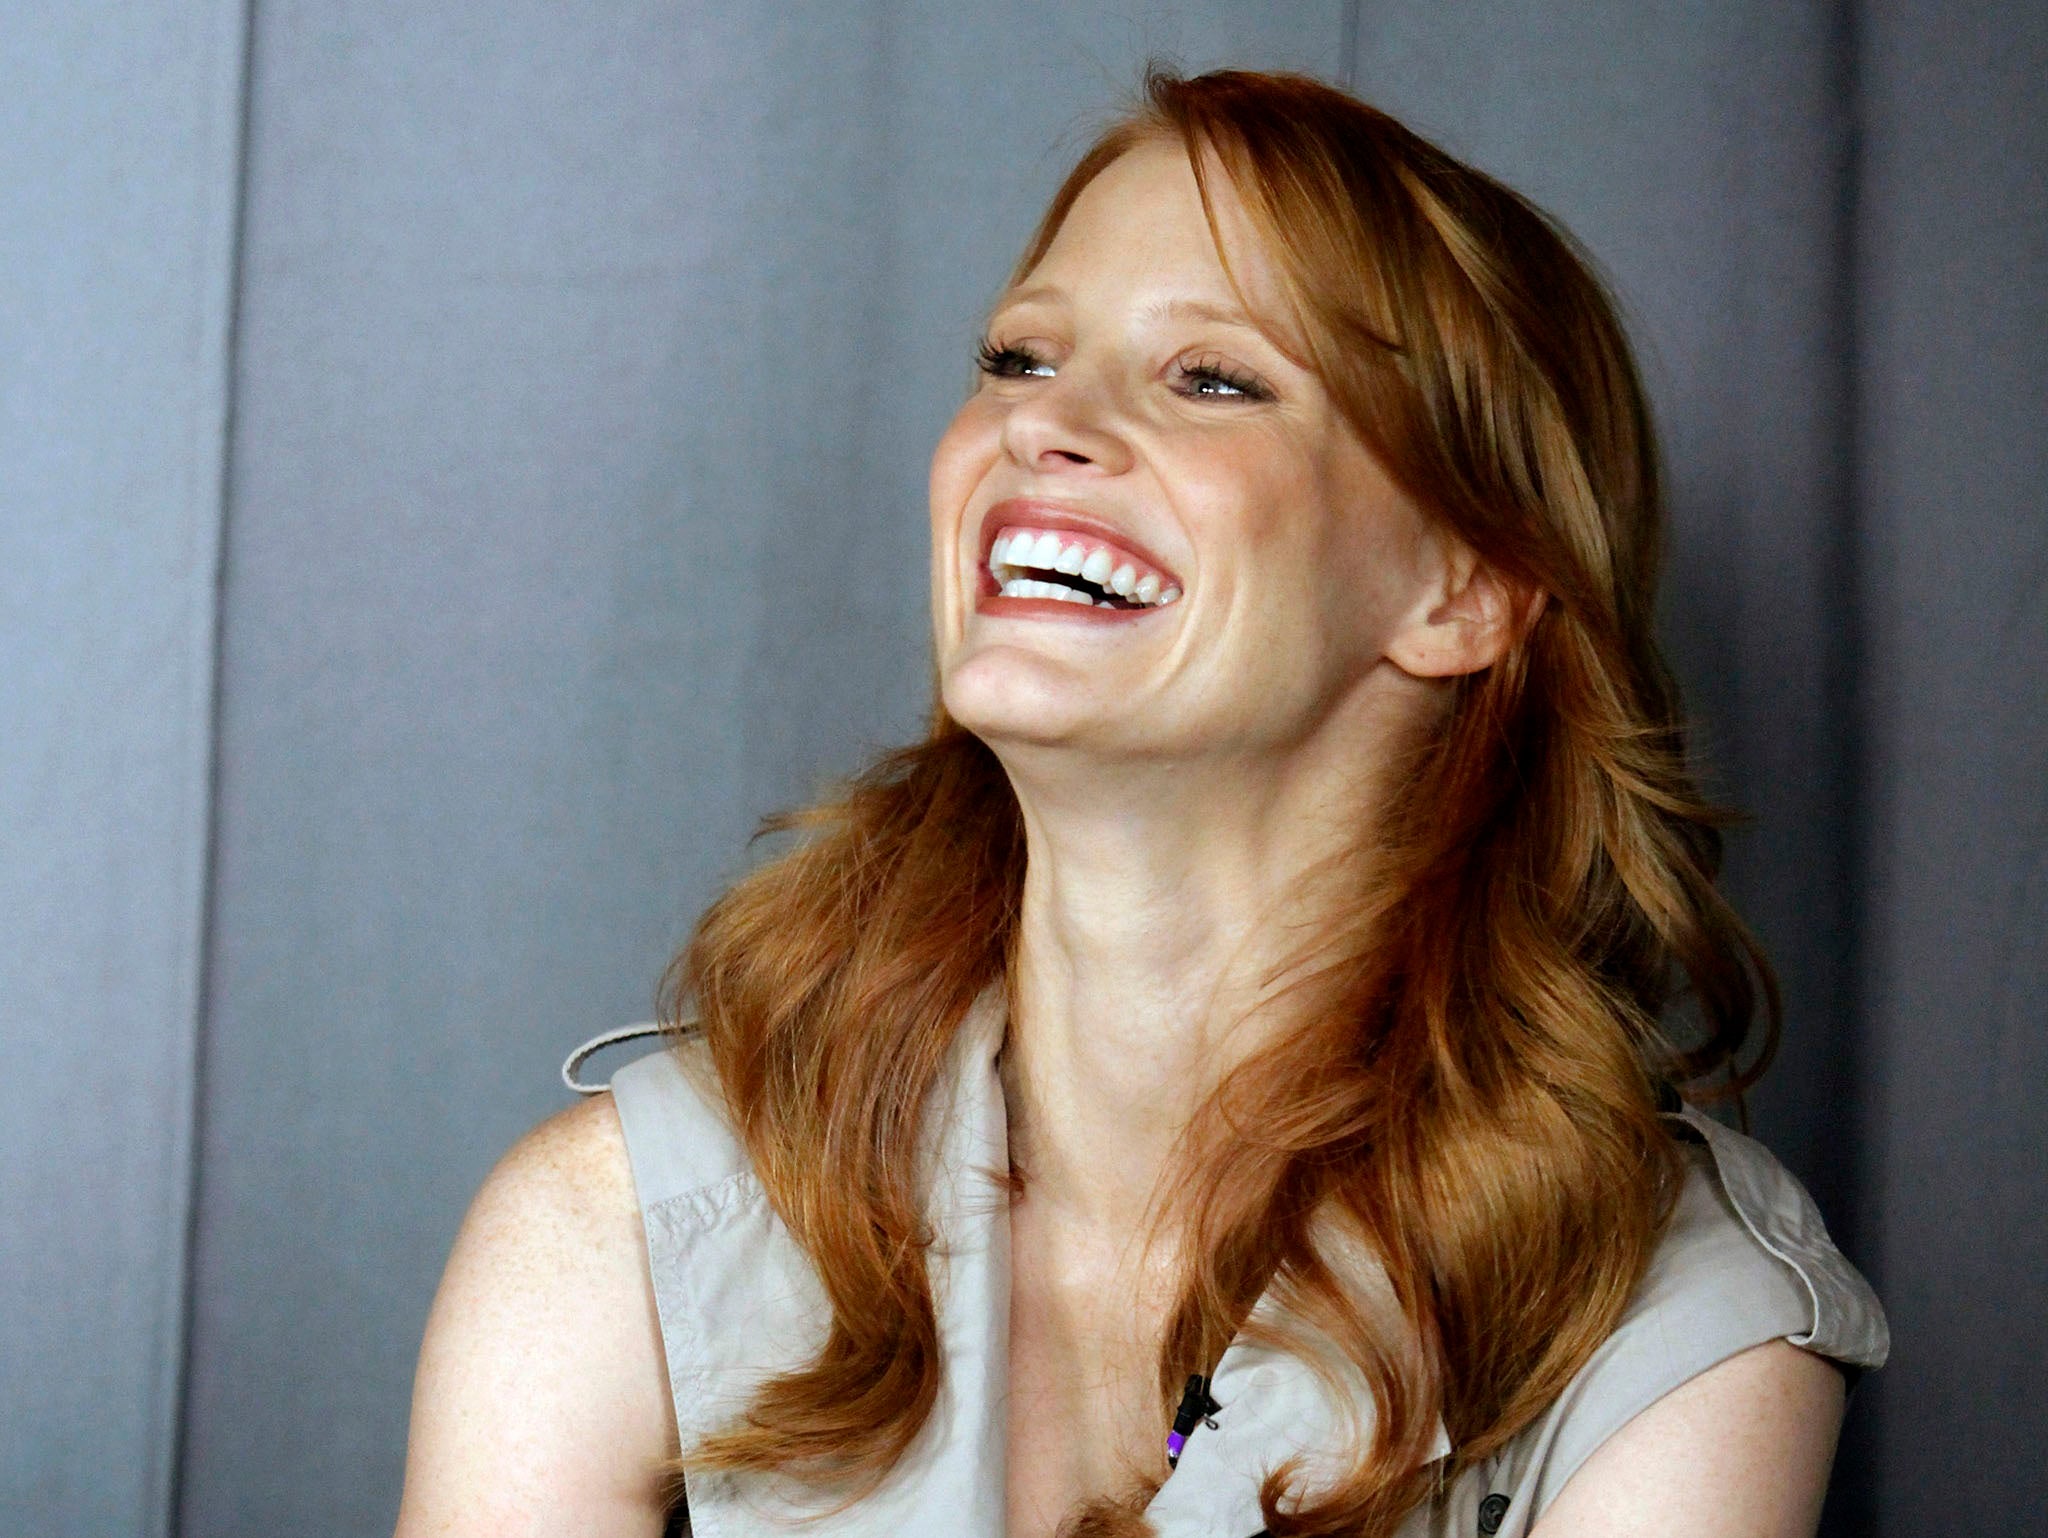 Jessica Chastain during an interview in Los Angeles.